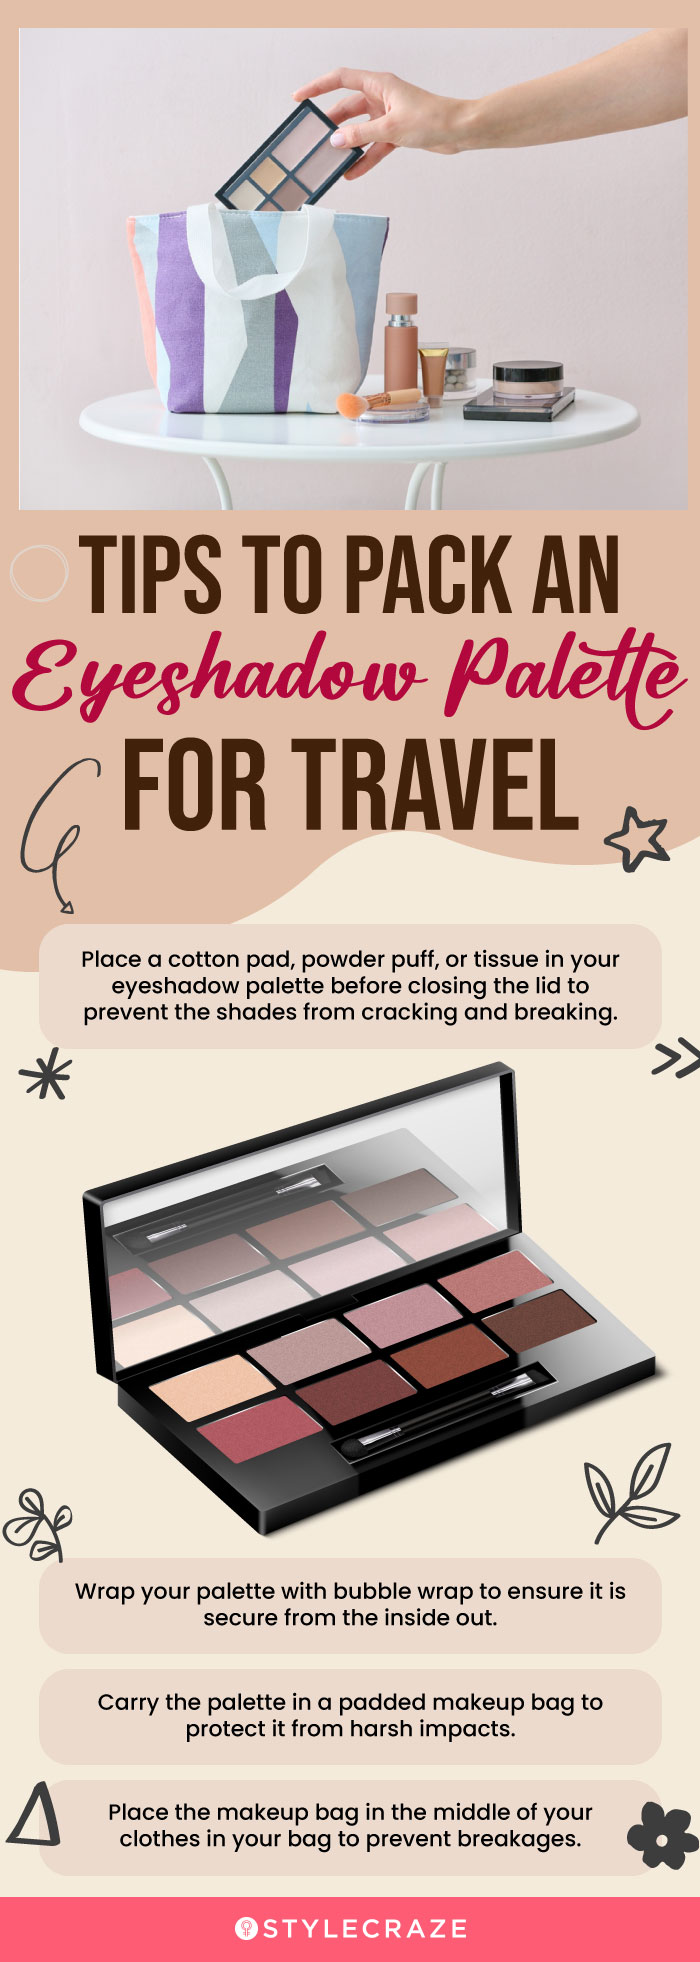 Tips To Pack An Eyeshadow Palette For Travel (infographic)